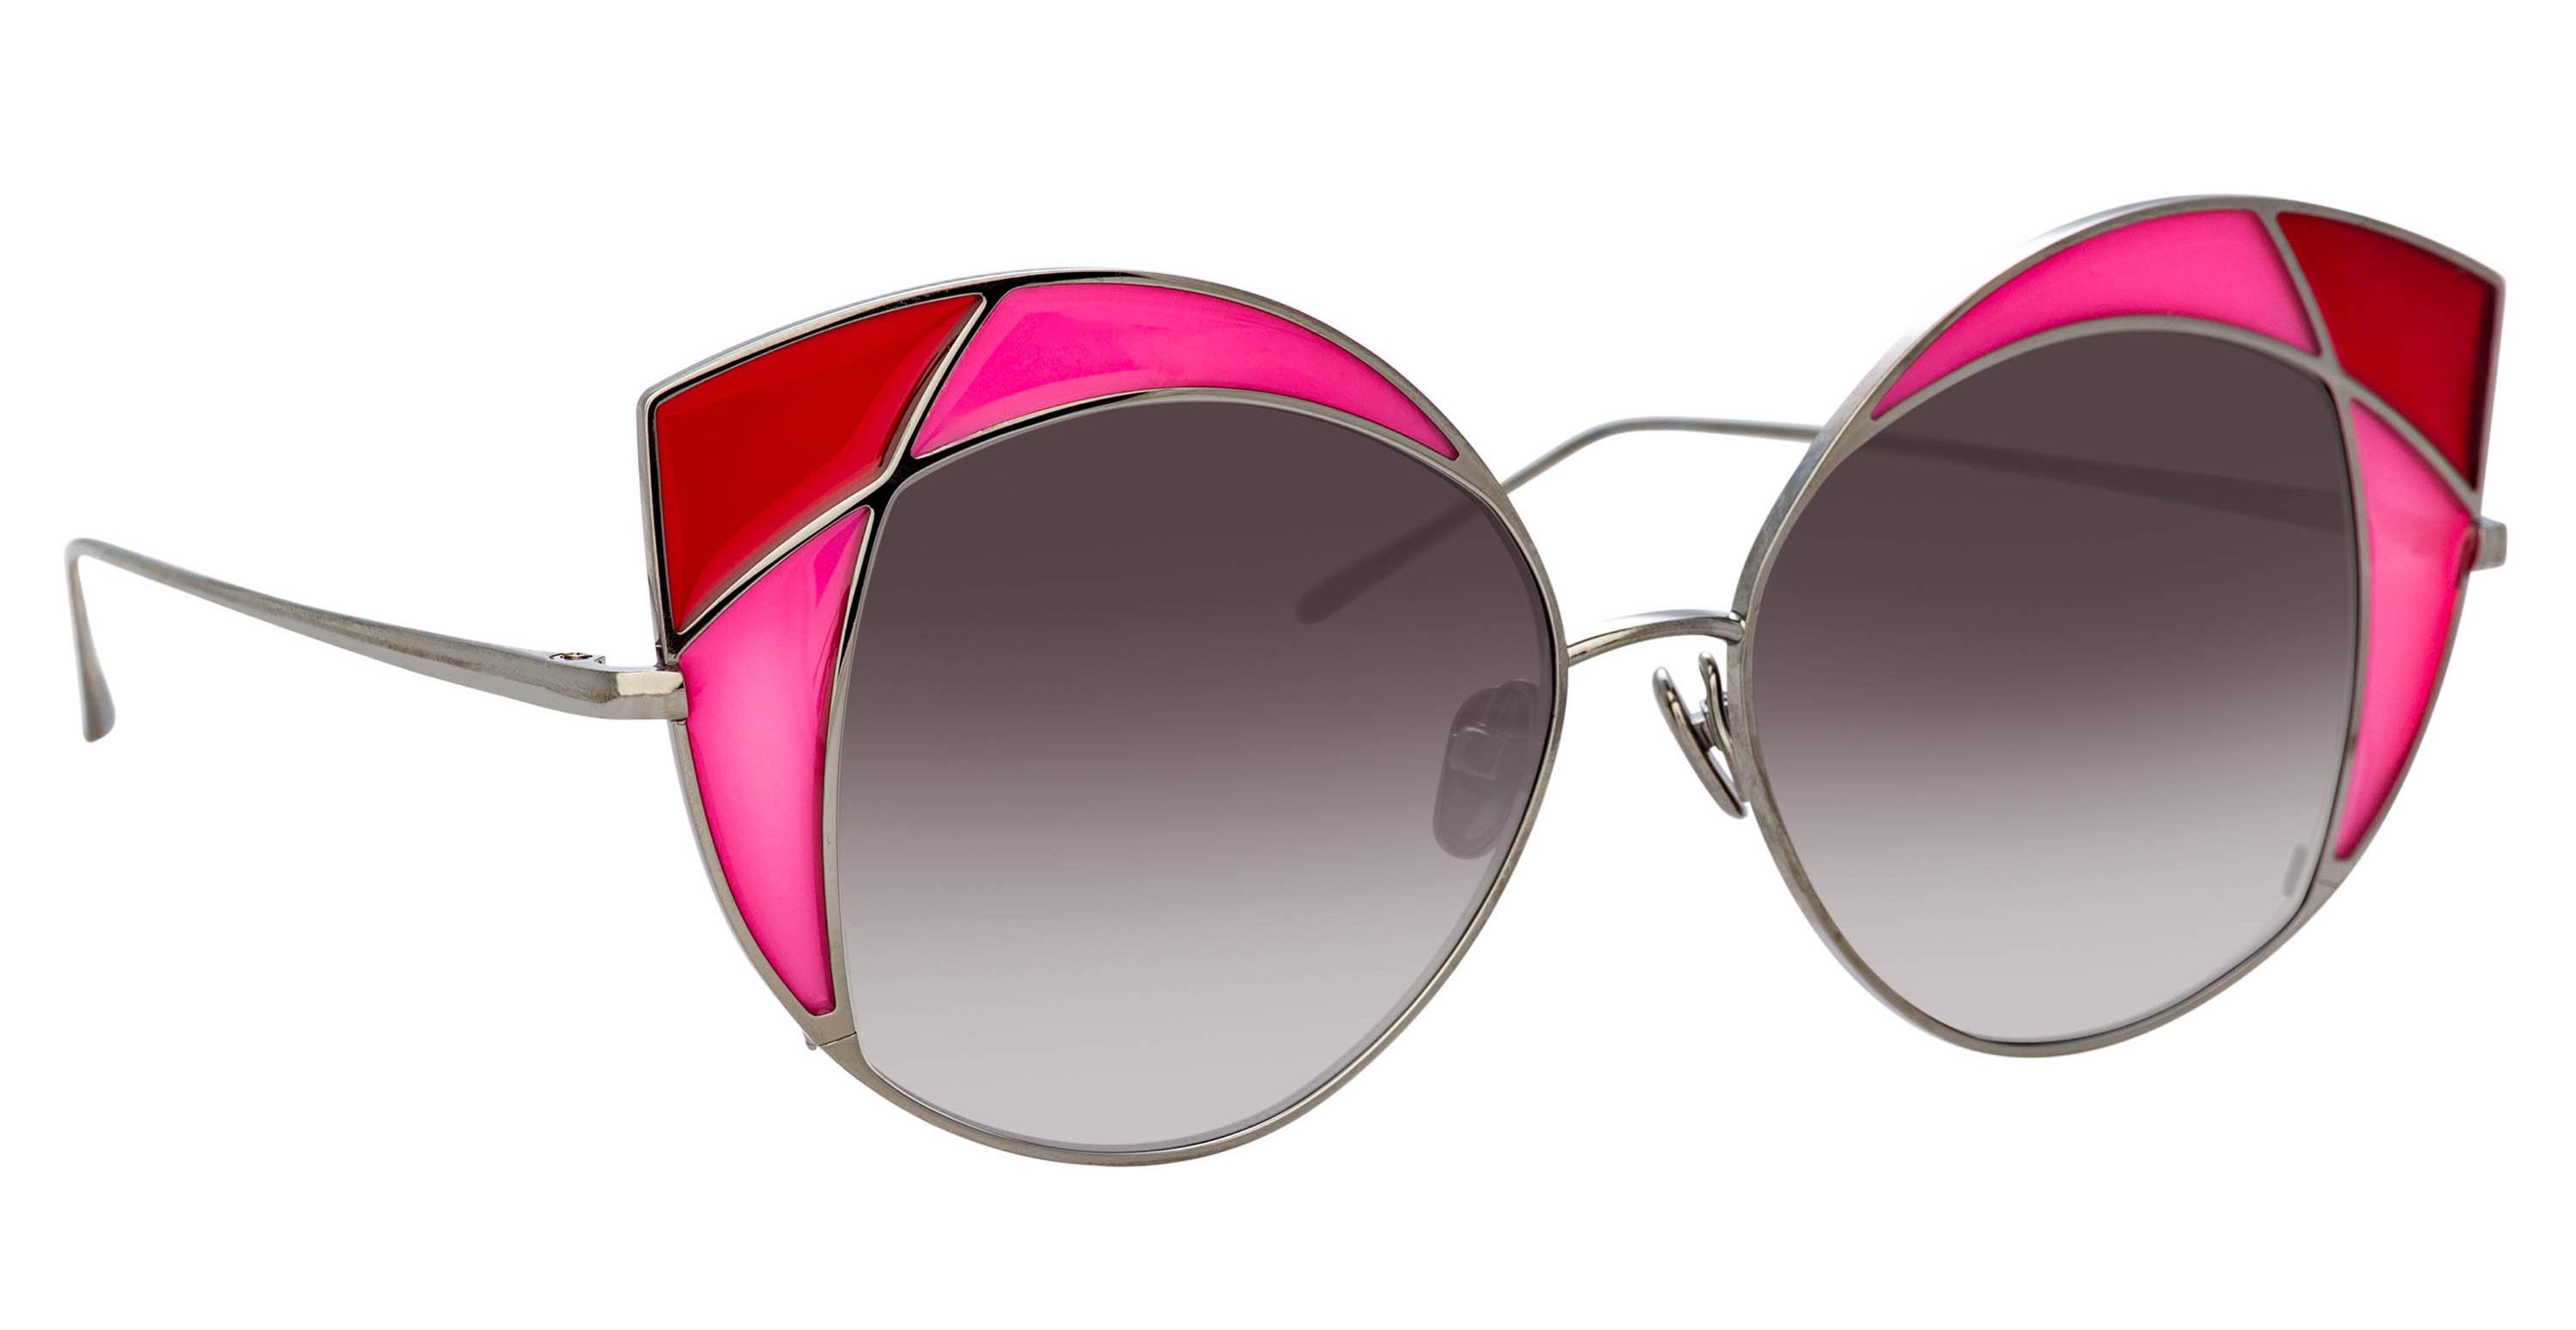 Cat eyes sunglasses with two-tone 'stained glass' corners by Linda Farrow